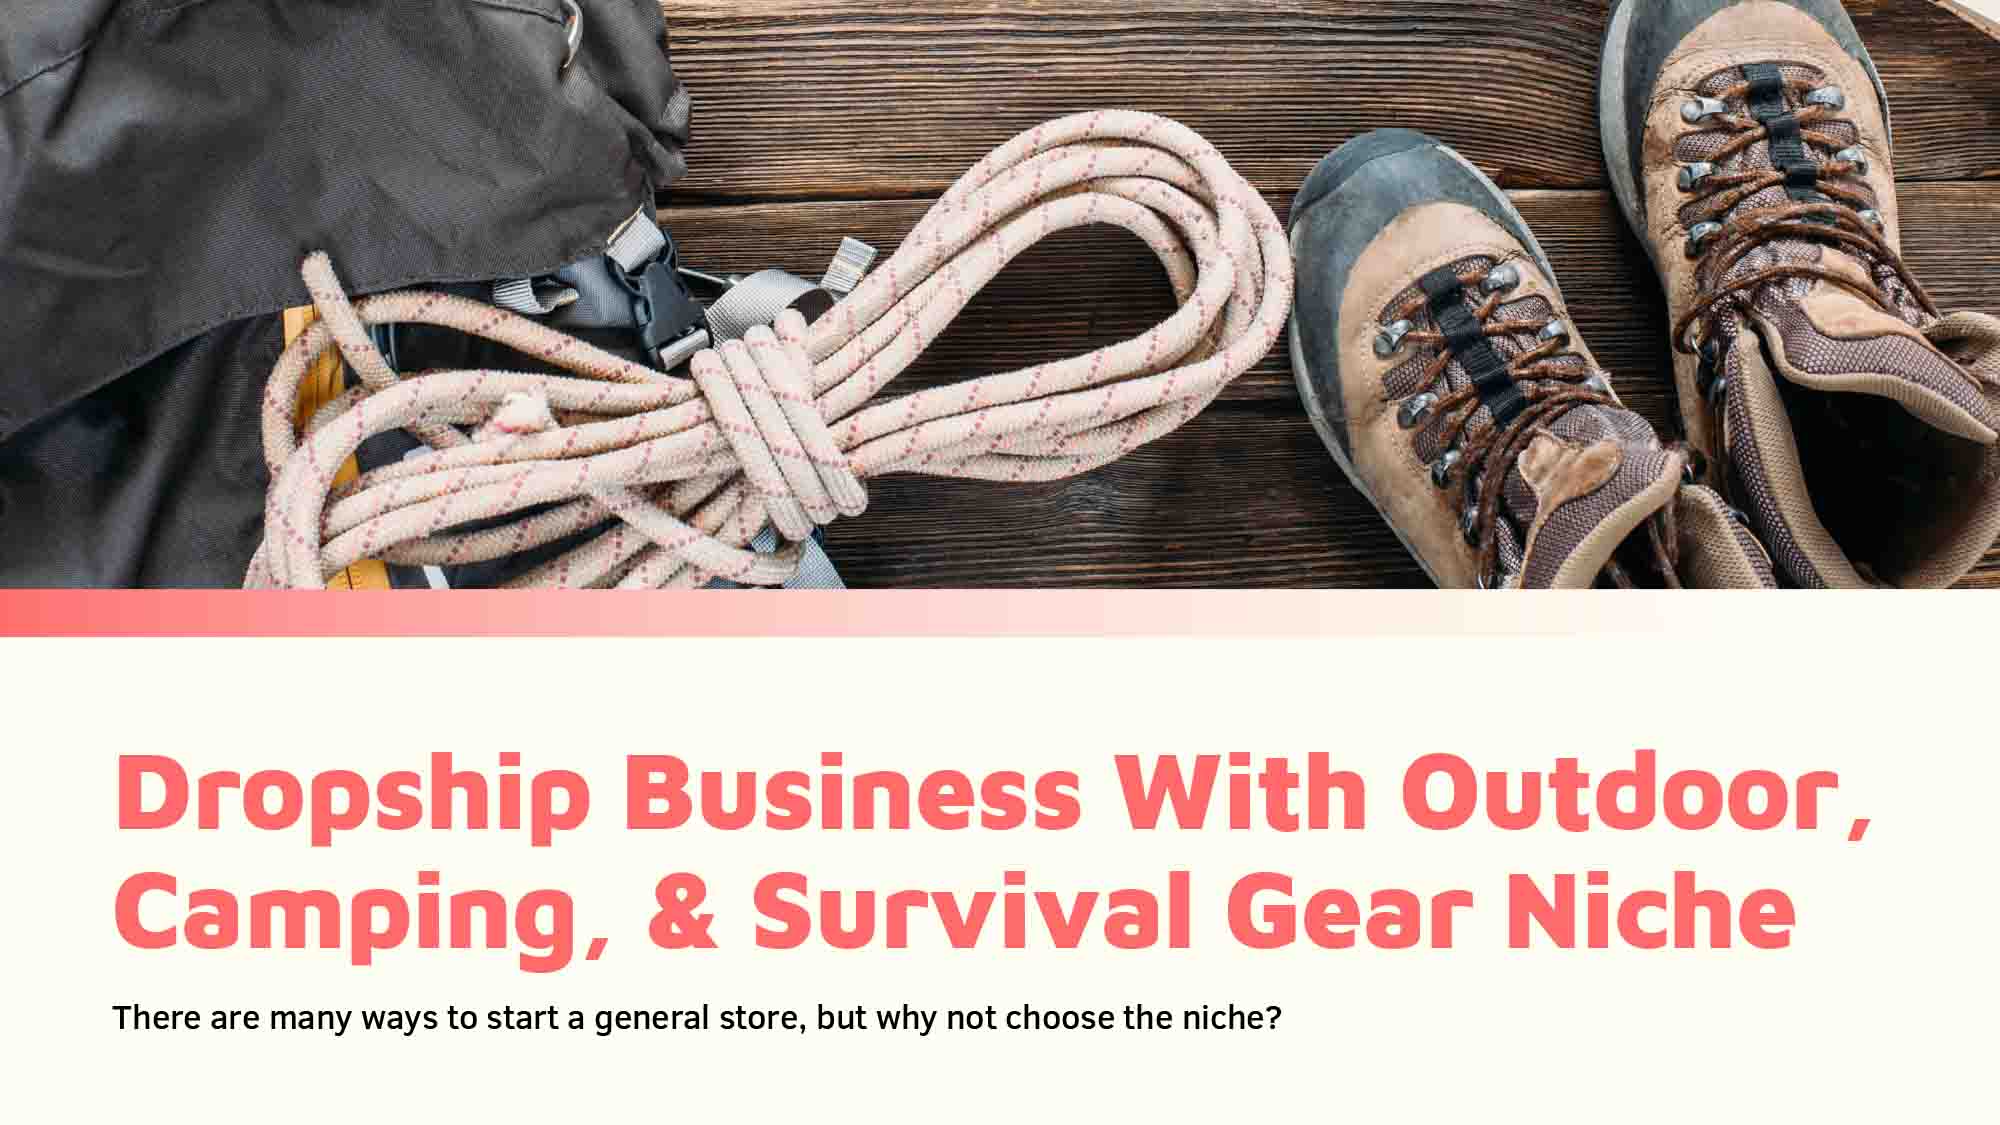 Building a Dropship Business With Outdoor, Camping, & Survival Gear Niche